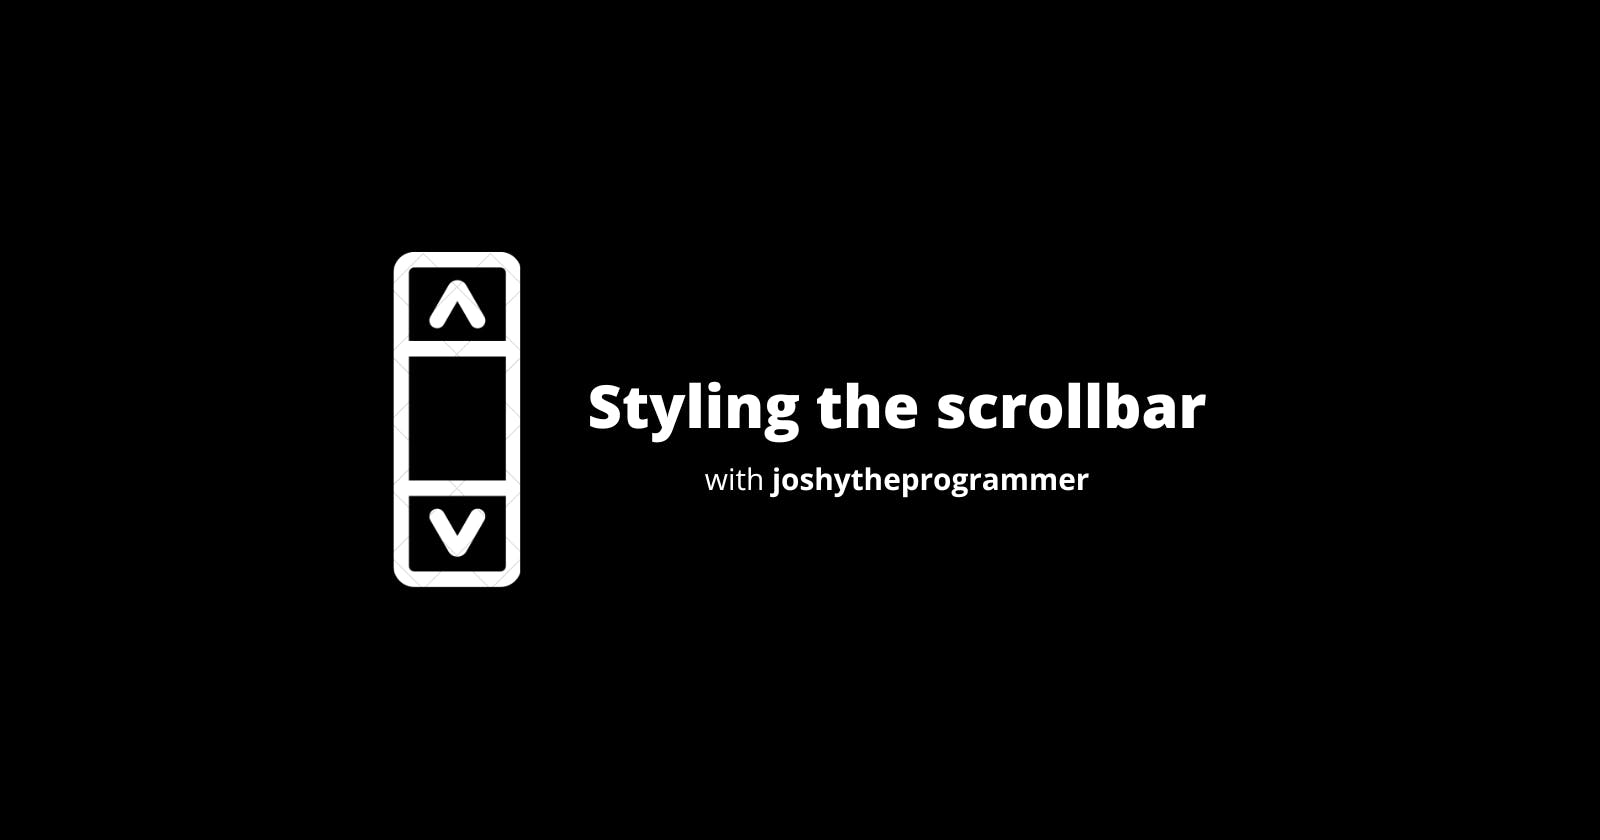 How to style the scrollbar